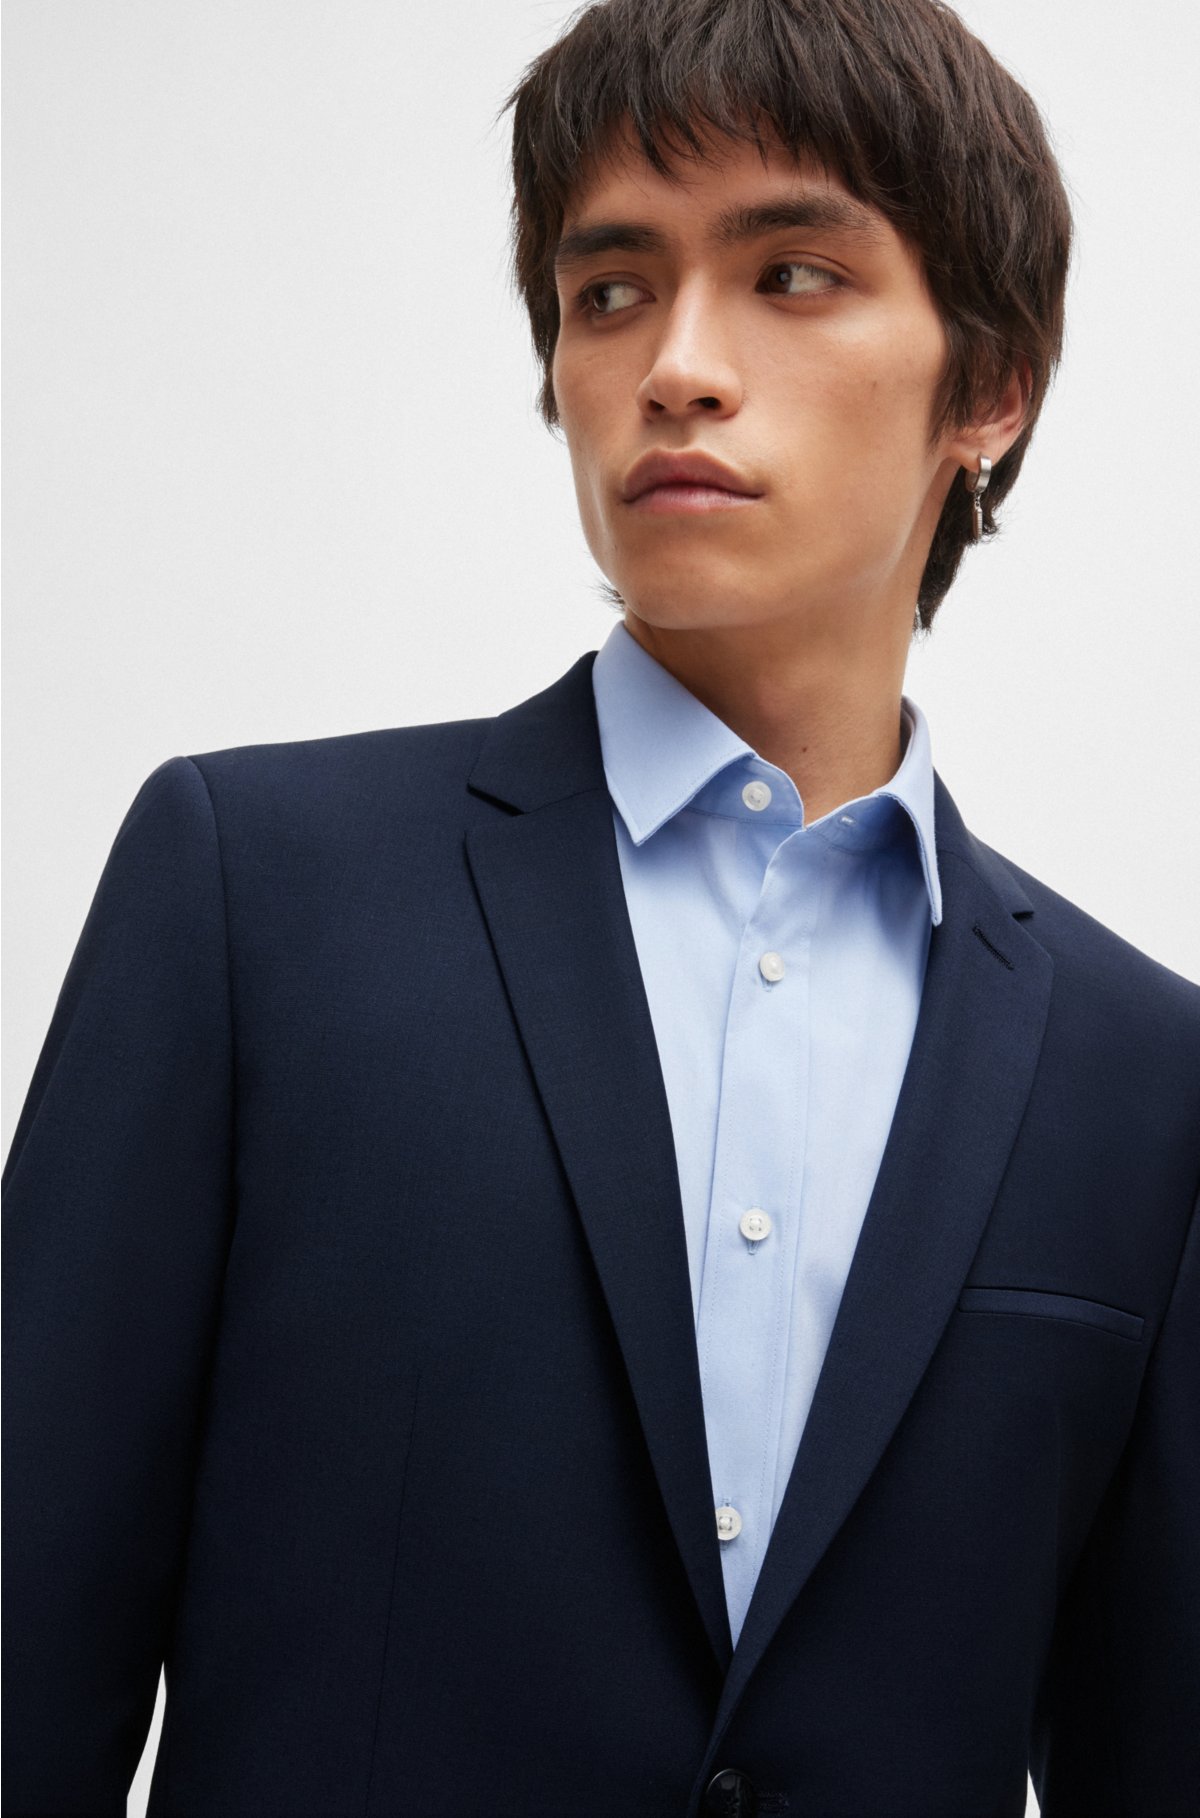 Discover blue Blazer jackets from top brands now at Zalando!